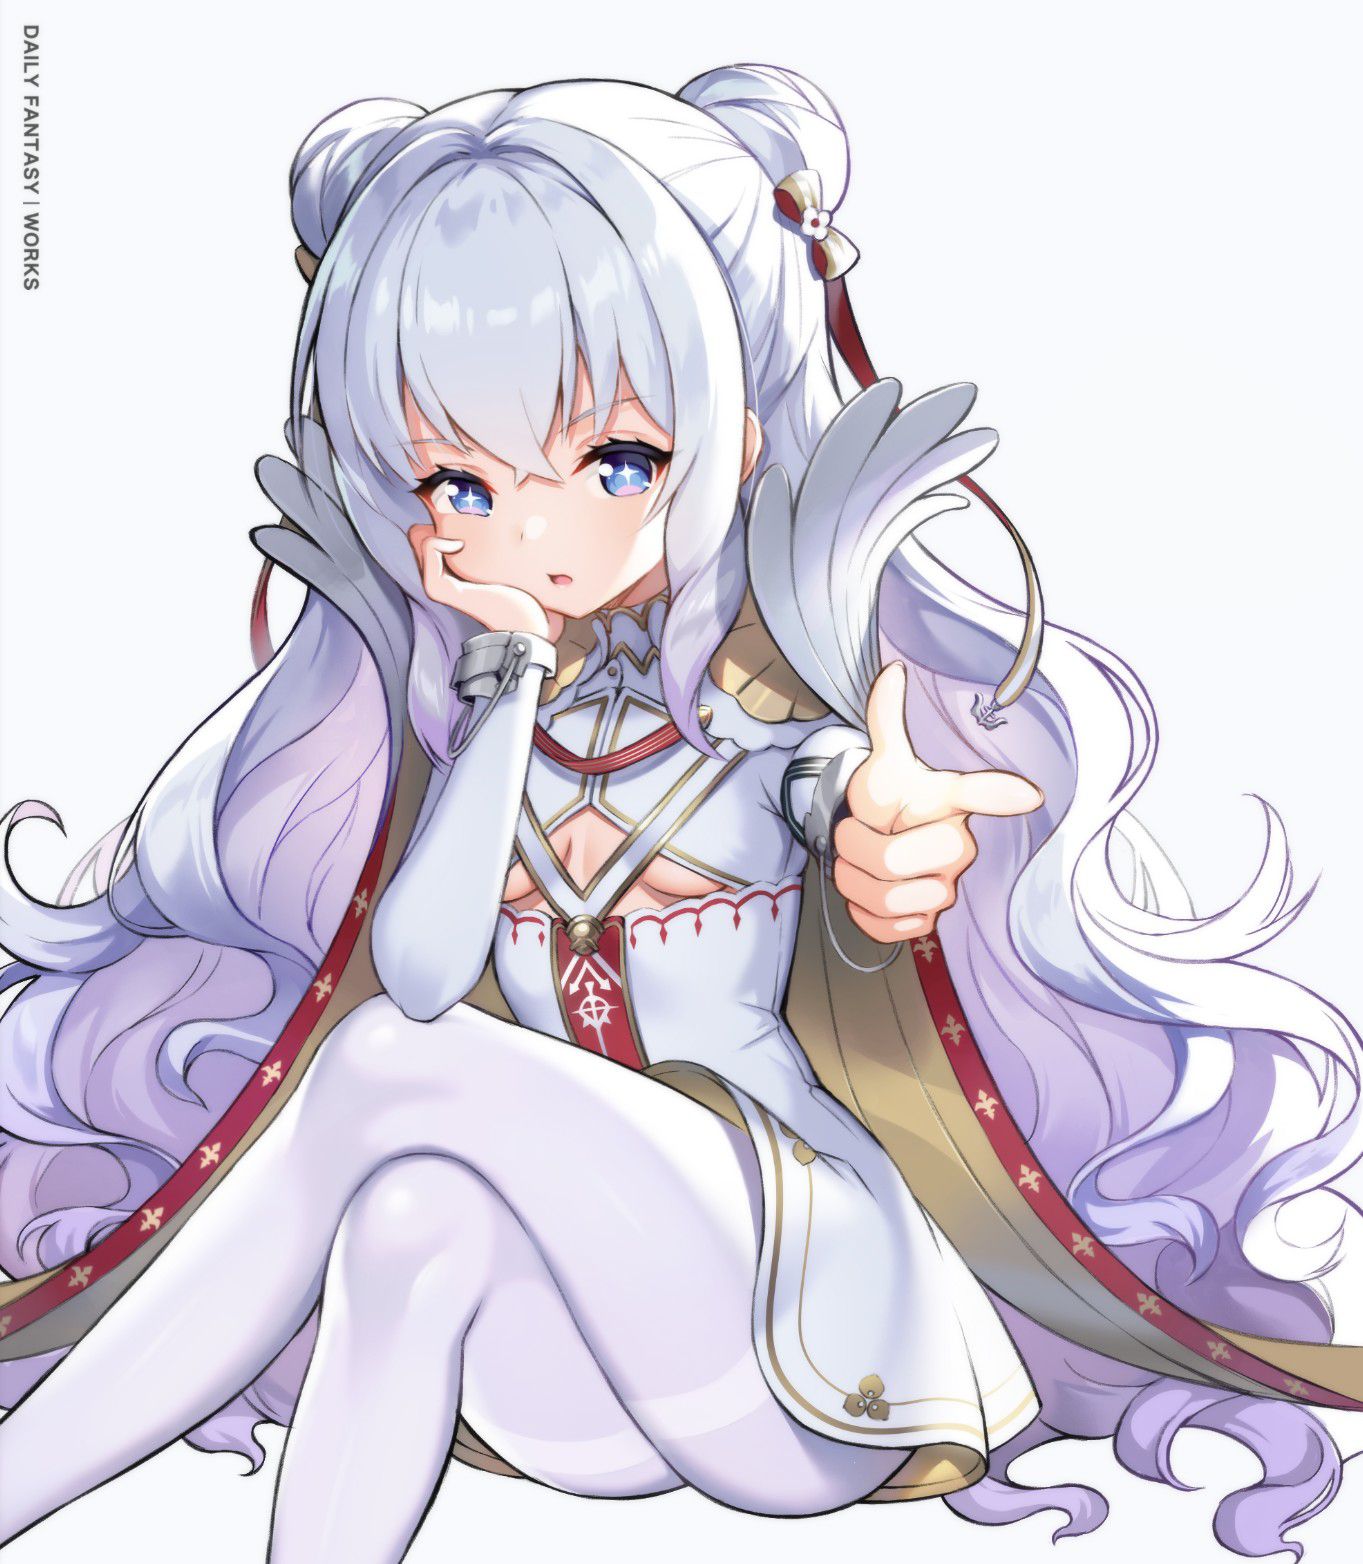 There are a lot of loli characters in Azur Lane! I didn't know Le Marant! But it's OK because it's eki 22